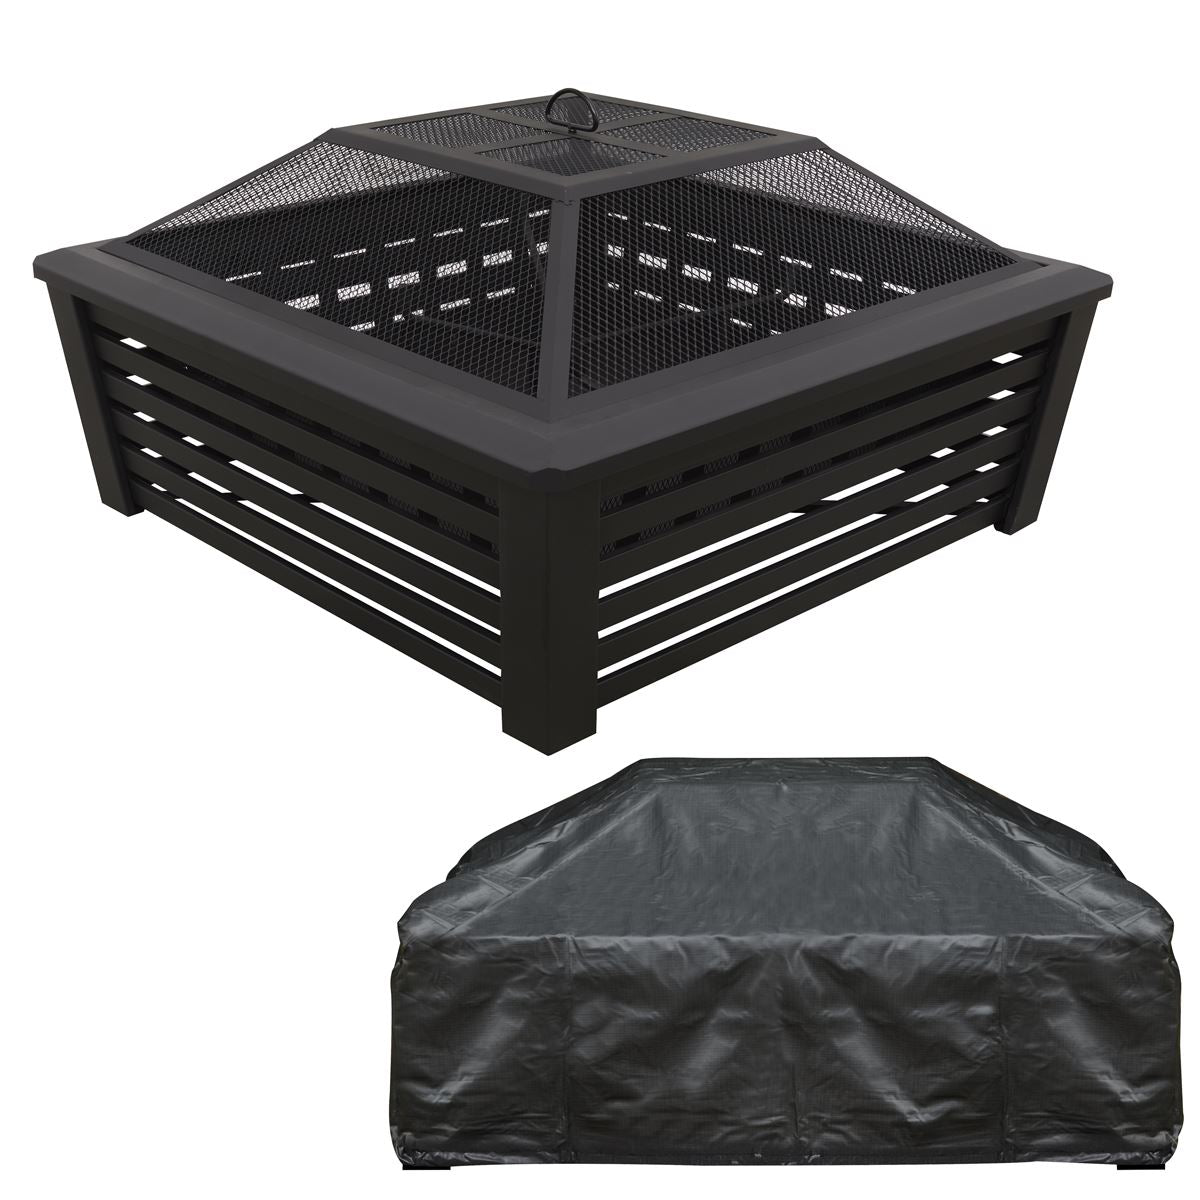 Dellonda 35" Square Outdoor Fire Pit, Mesh Screen Lid, Black with Water Resistant Drawstring Cover